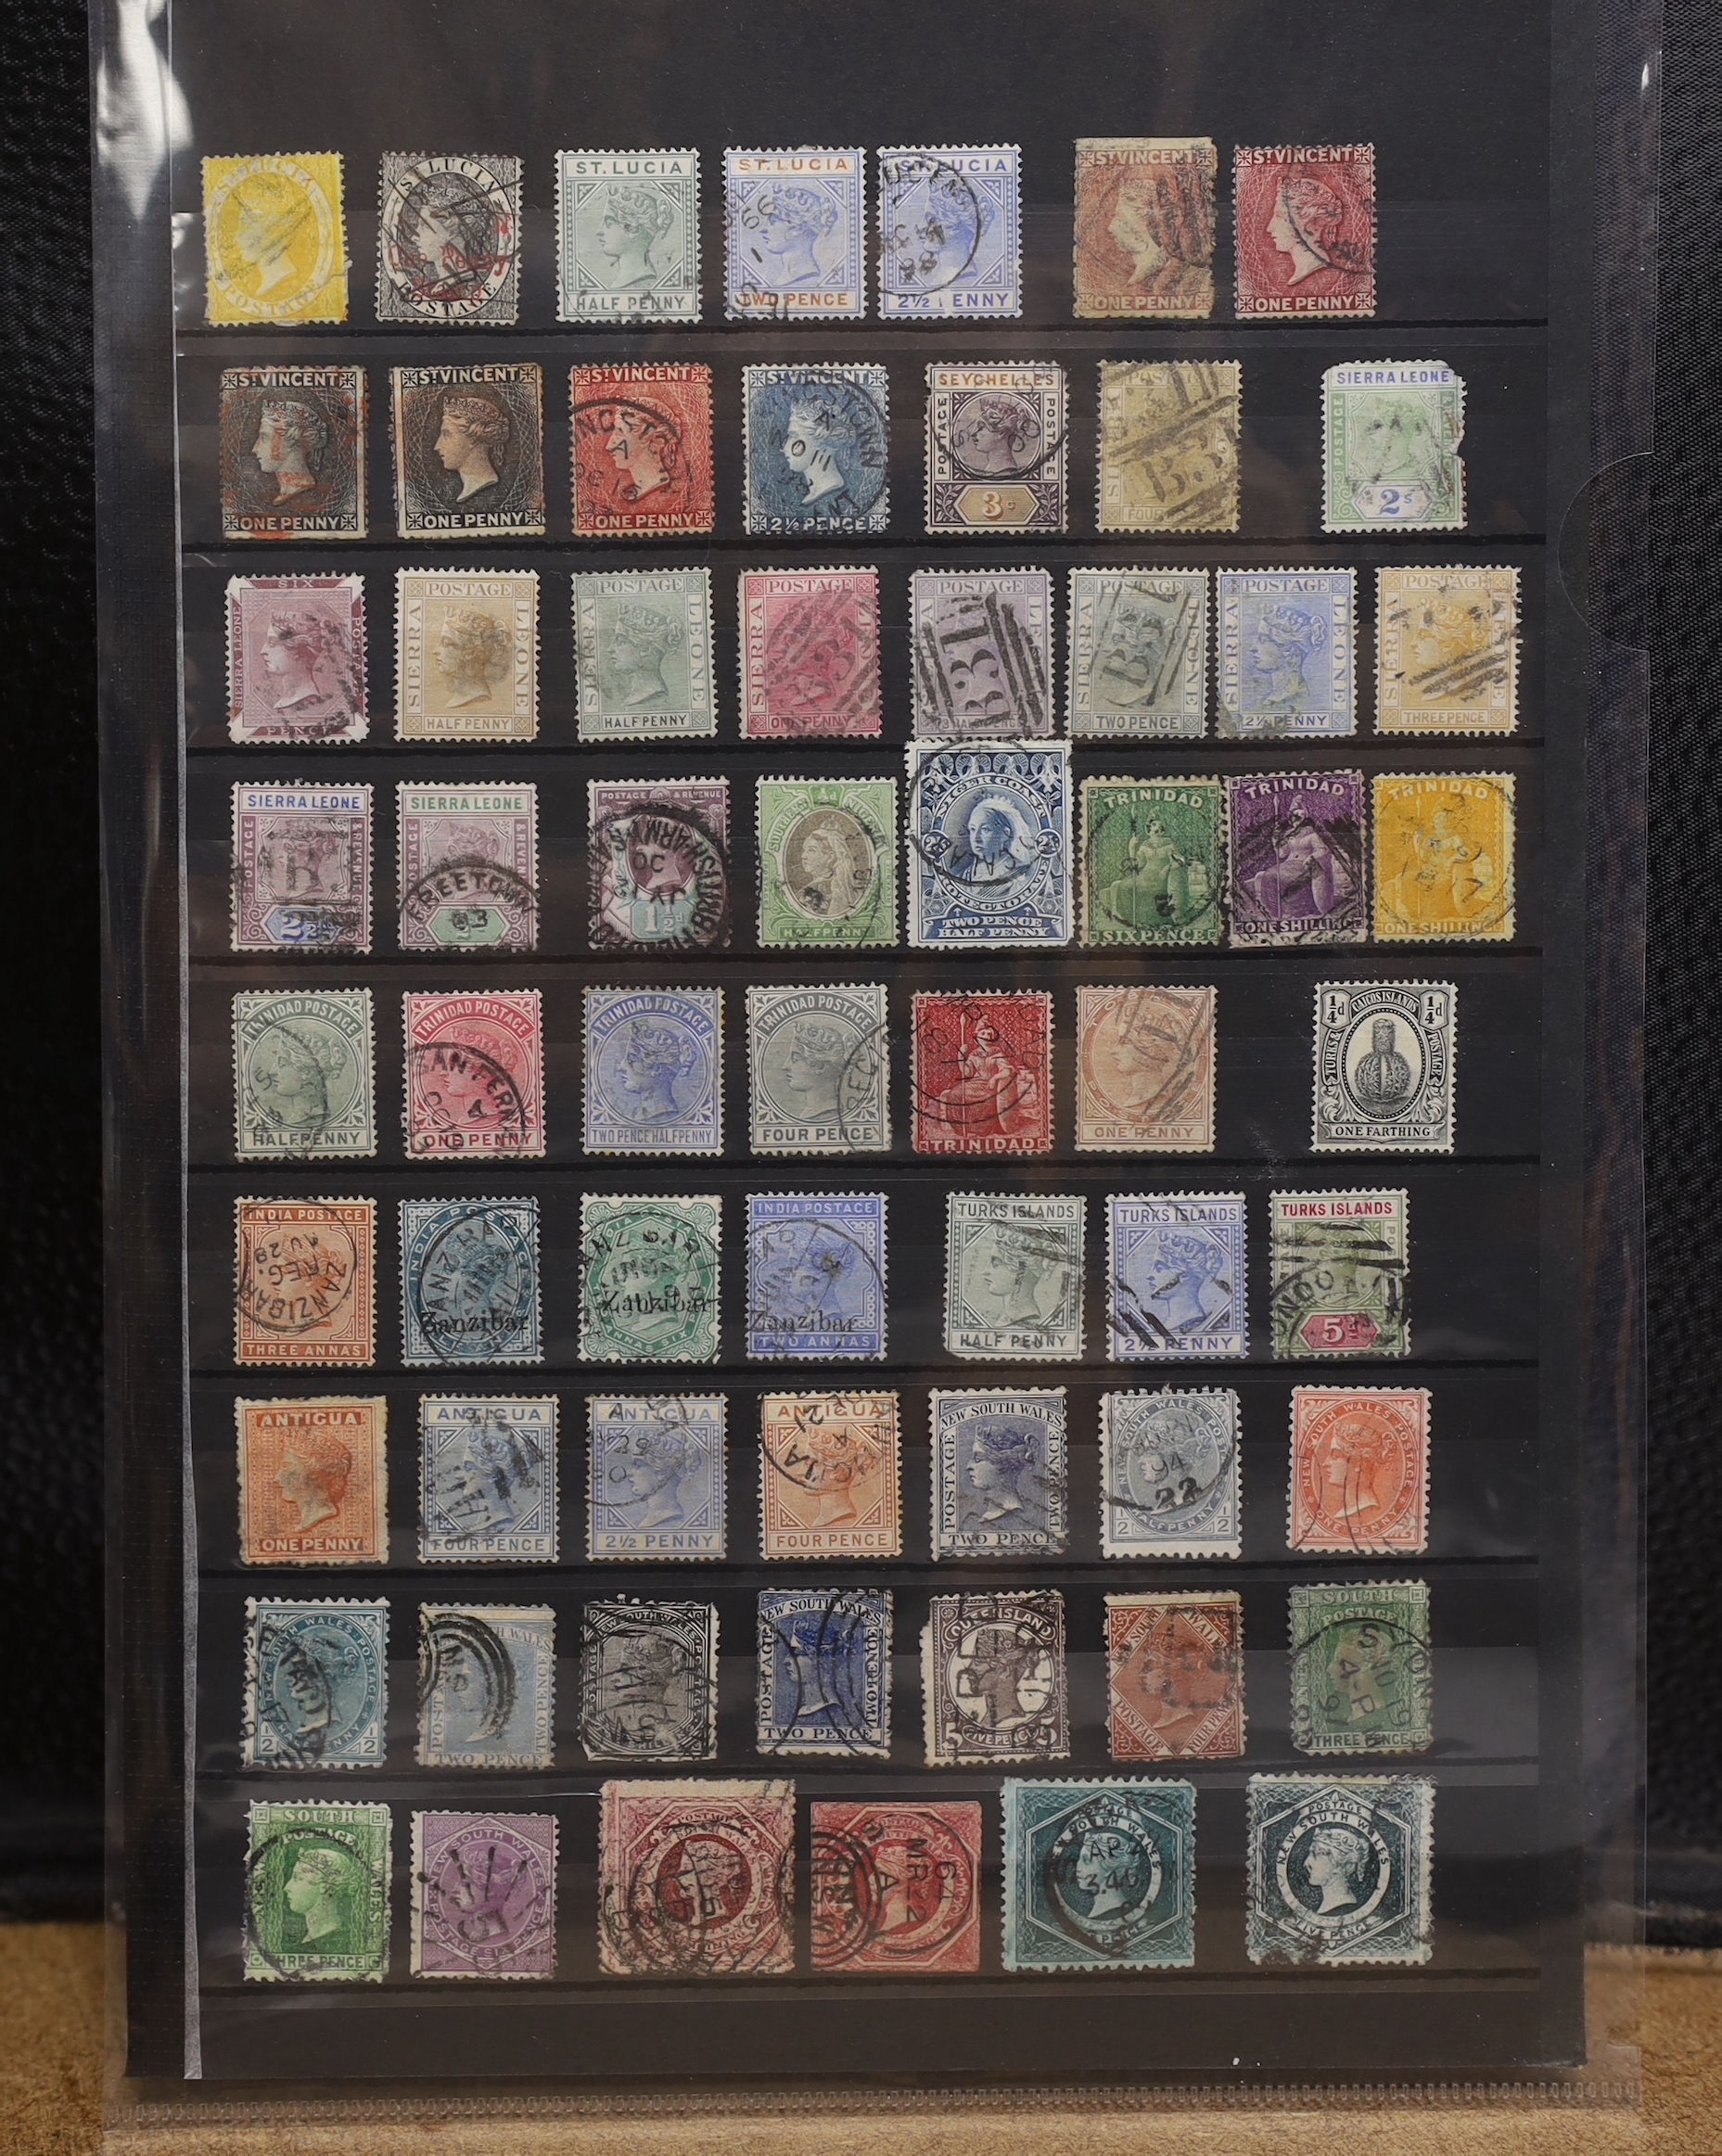 Three hundred and sixty GB and Commonwealth stamps, 19th century